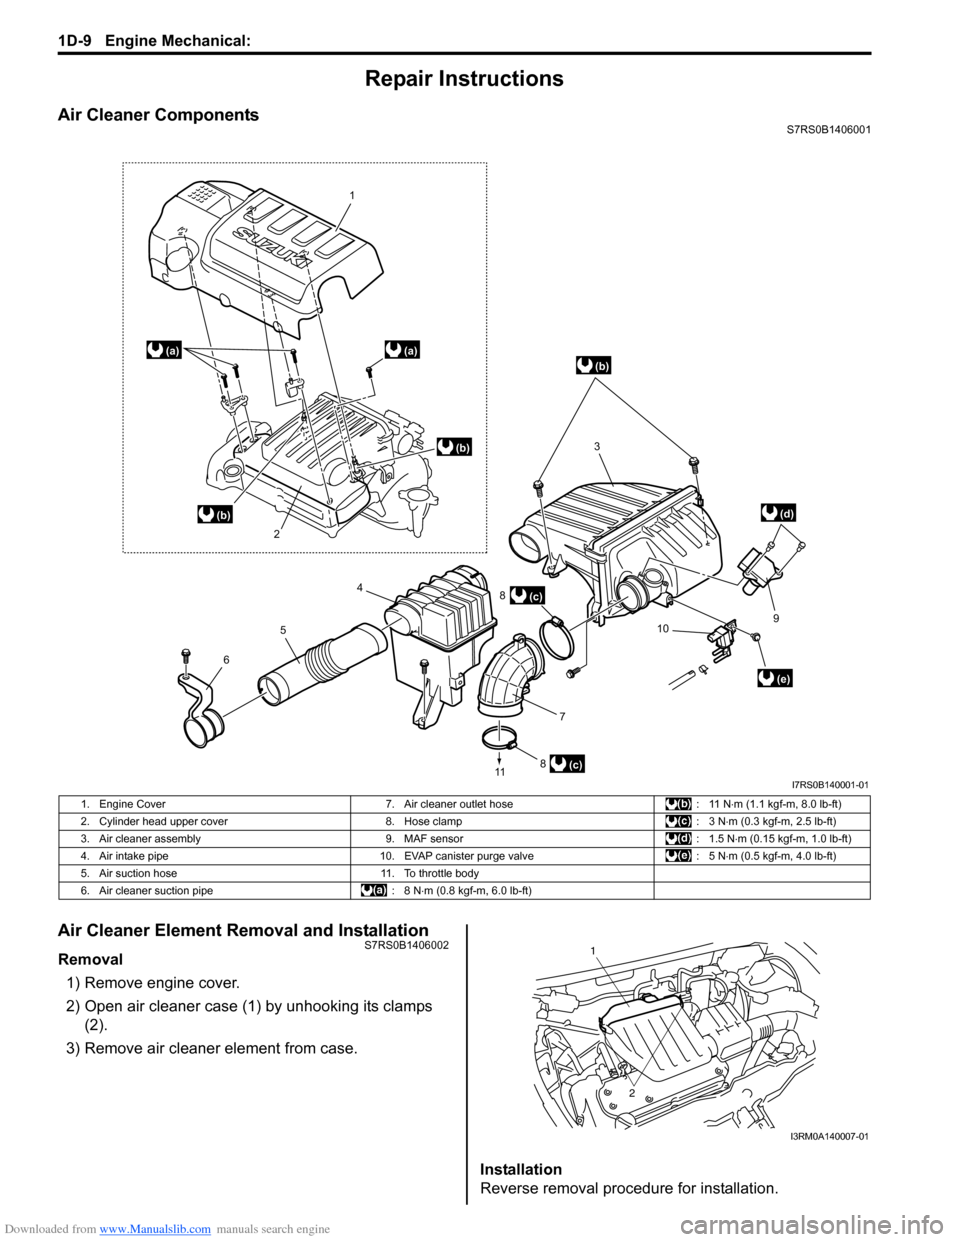 SUZUKI SWIFT 2006 2.G Service Workshop Manual Downloaded from www.Manualslib.com manuals search engine 1D-9 Engine Mechanical: 
Repair Instructions
Air Cleaner ComponentsS7RS0B1406001
Air Cleaner Element Removal and InstallationS7RS0B1406002
Remo